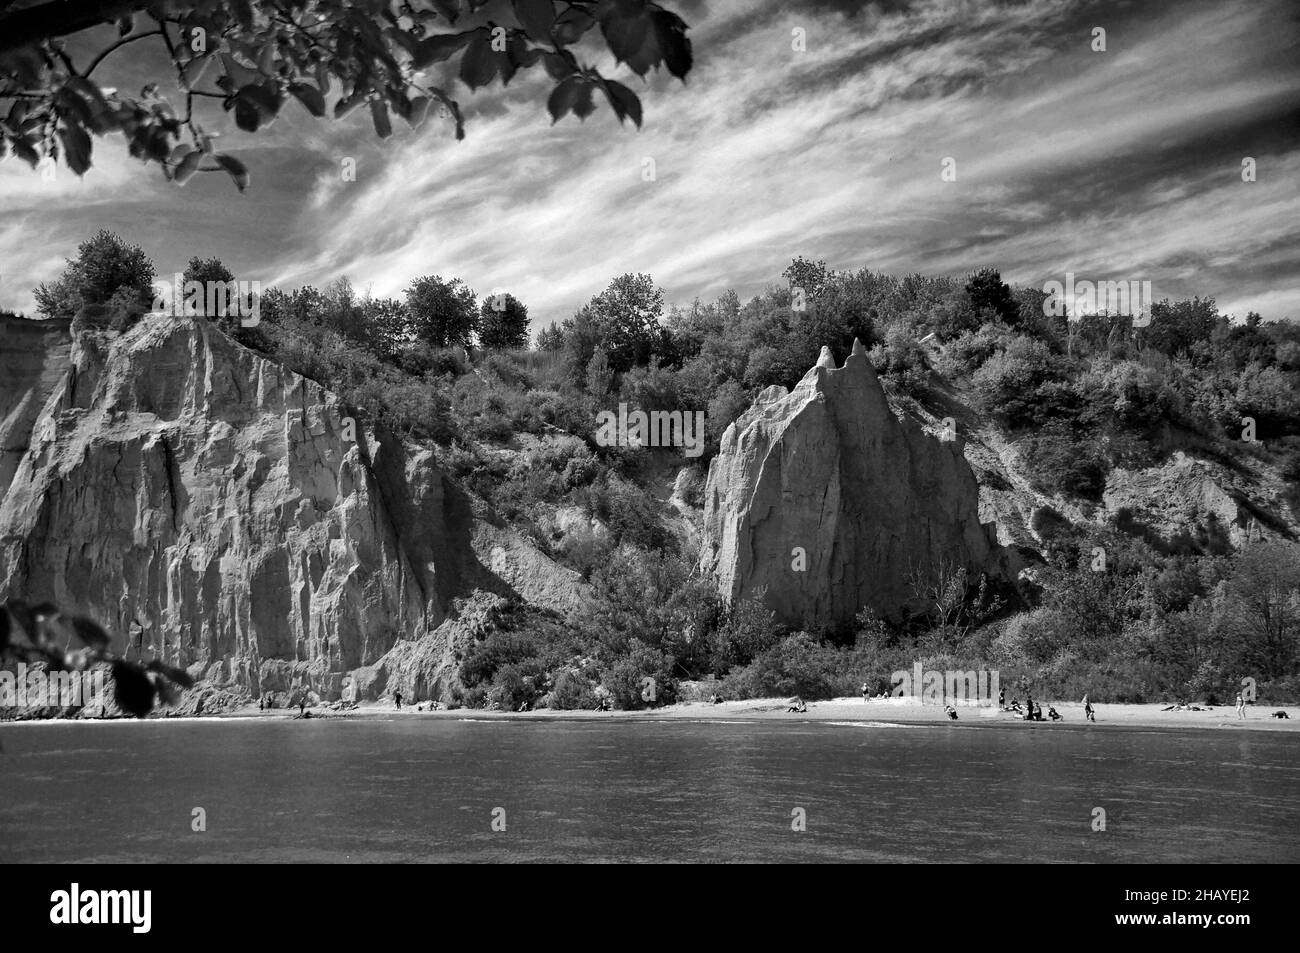 Summer view on the shoreline of the Lake Ontario in Scarborough Bluffs Park, the city's outdoor destination popular among the citizens of Toronto. Stock Photo